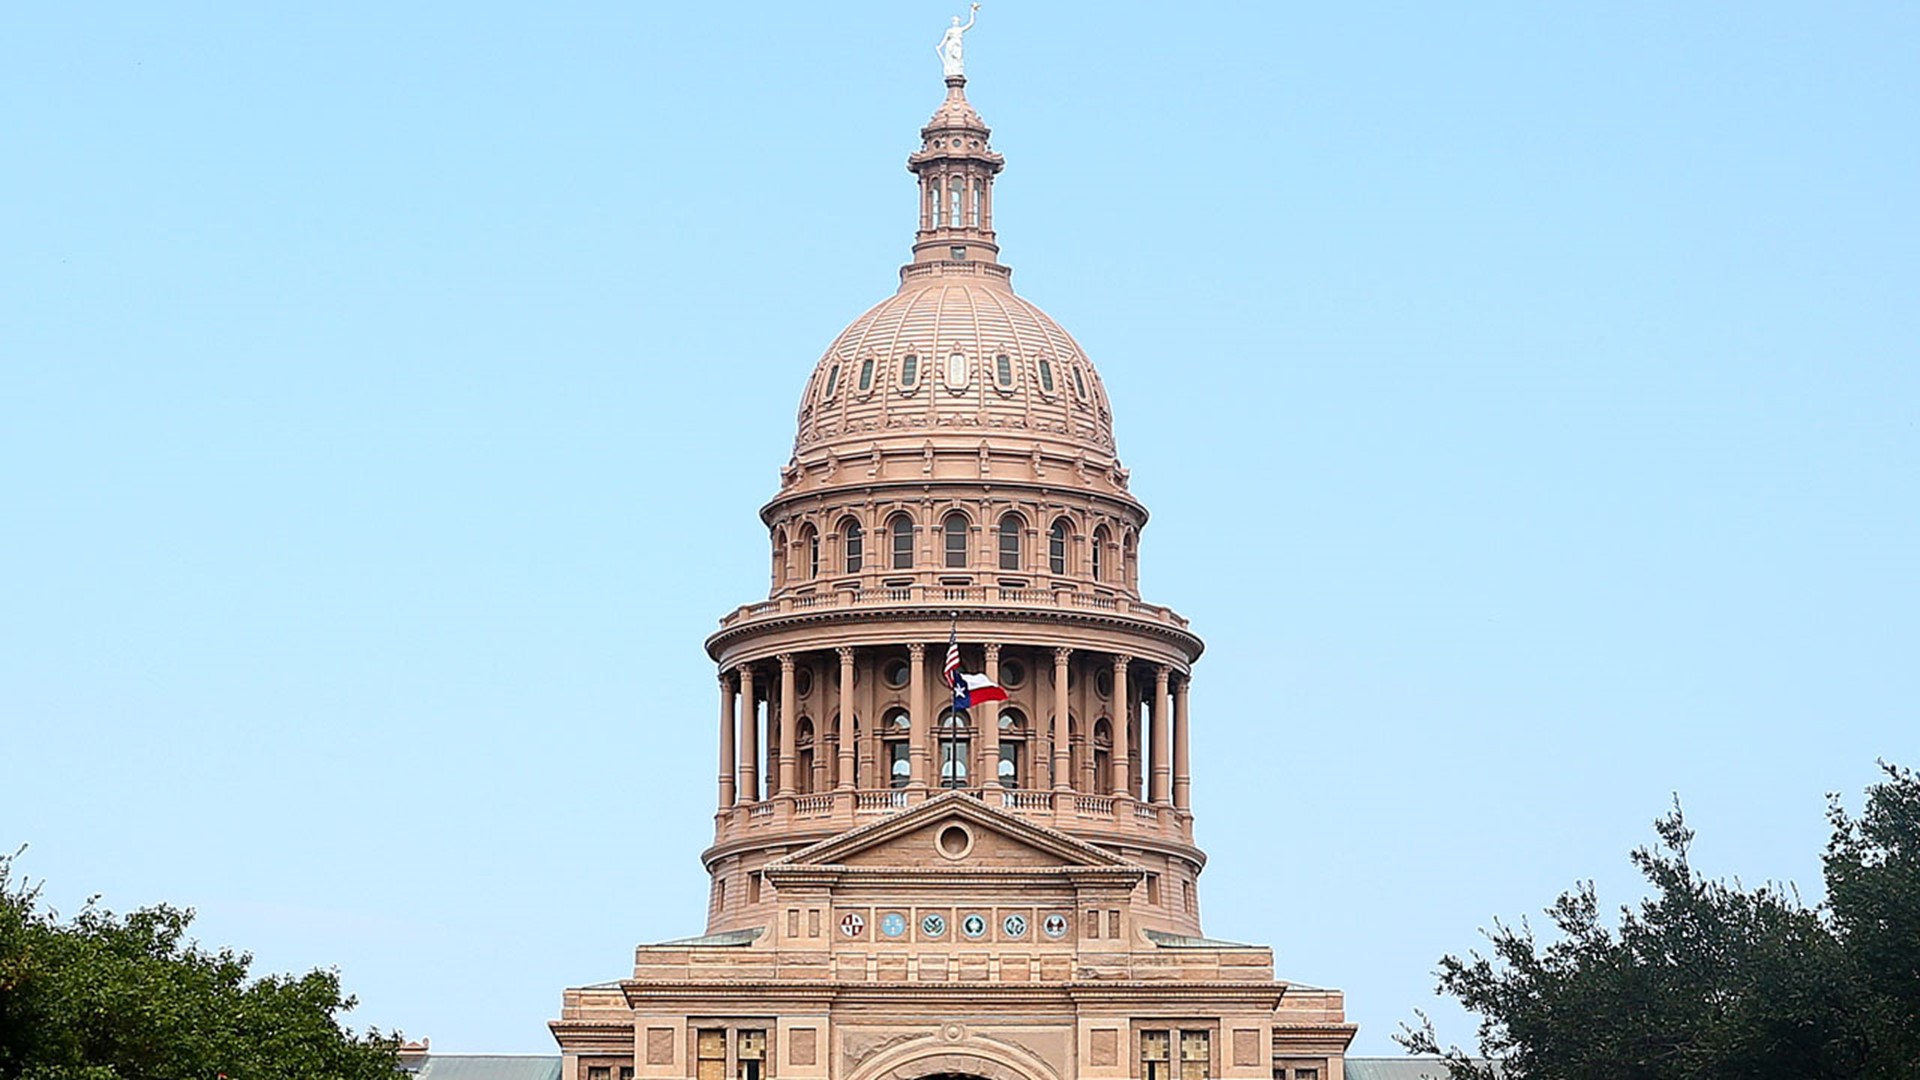 Texas Senators were looking for answers about how to prevent massive power outages in the future, but didn't get much help in hearings with energy leaders.